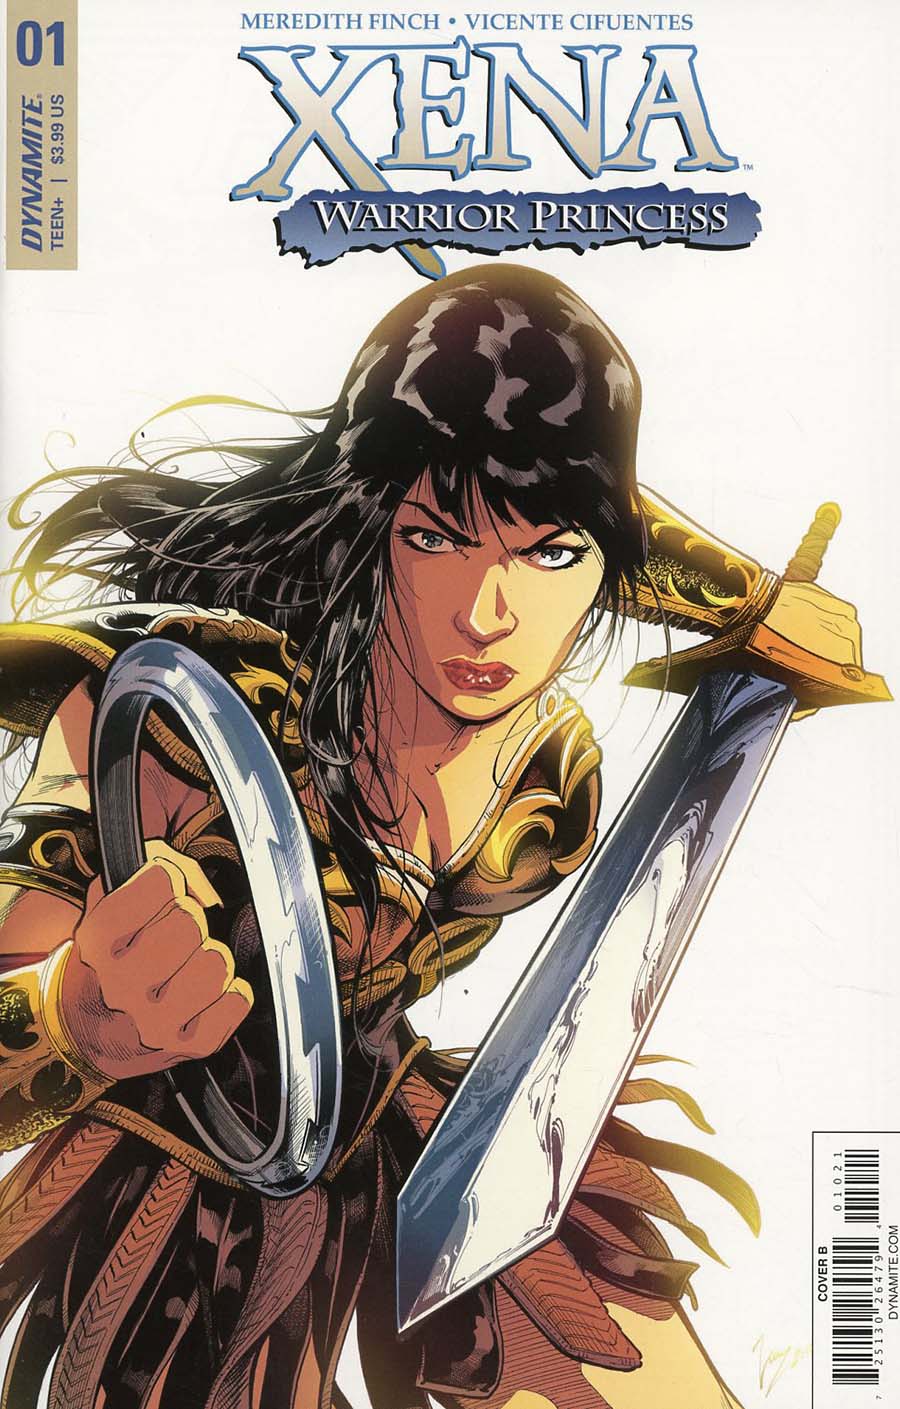 Xena Vol 2 #1 Cover B Variant Vicente Cifuentes Cover